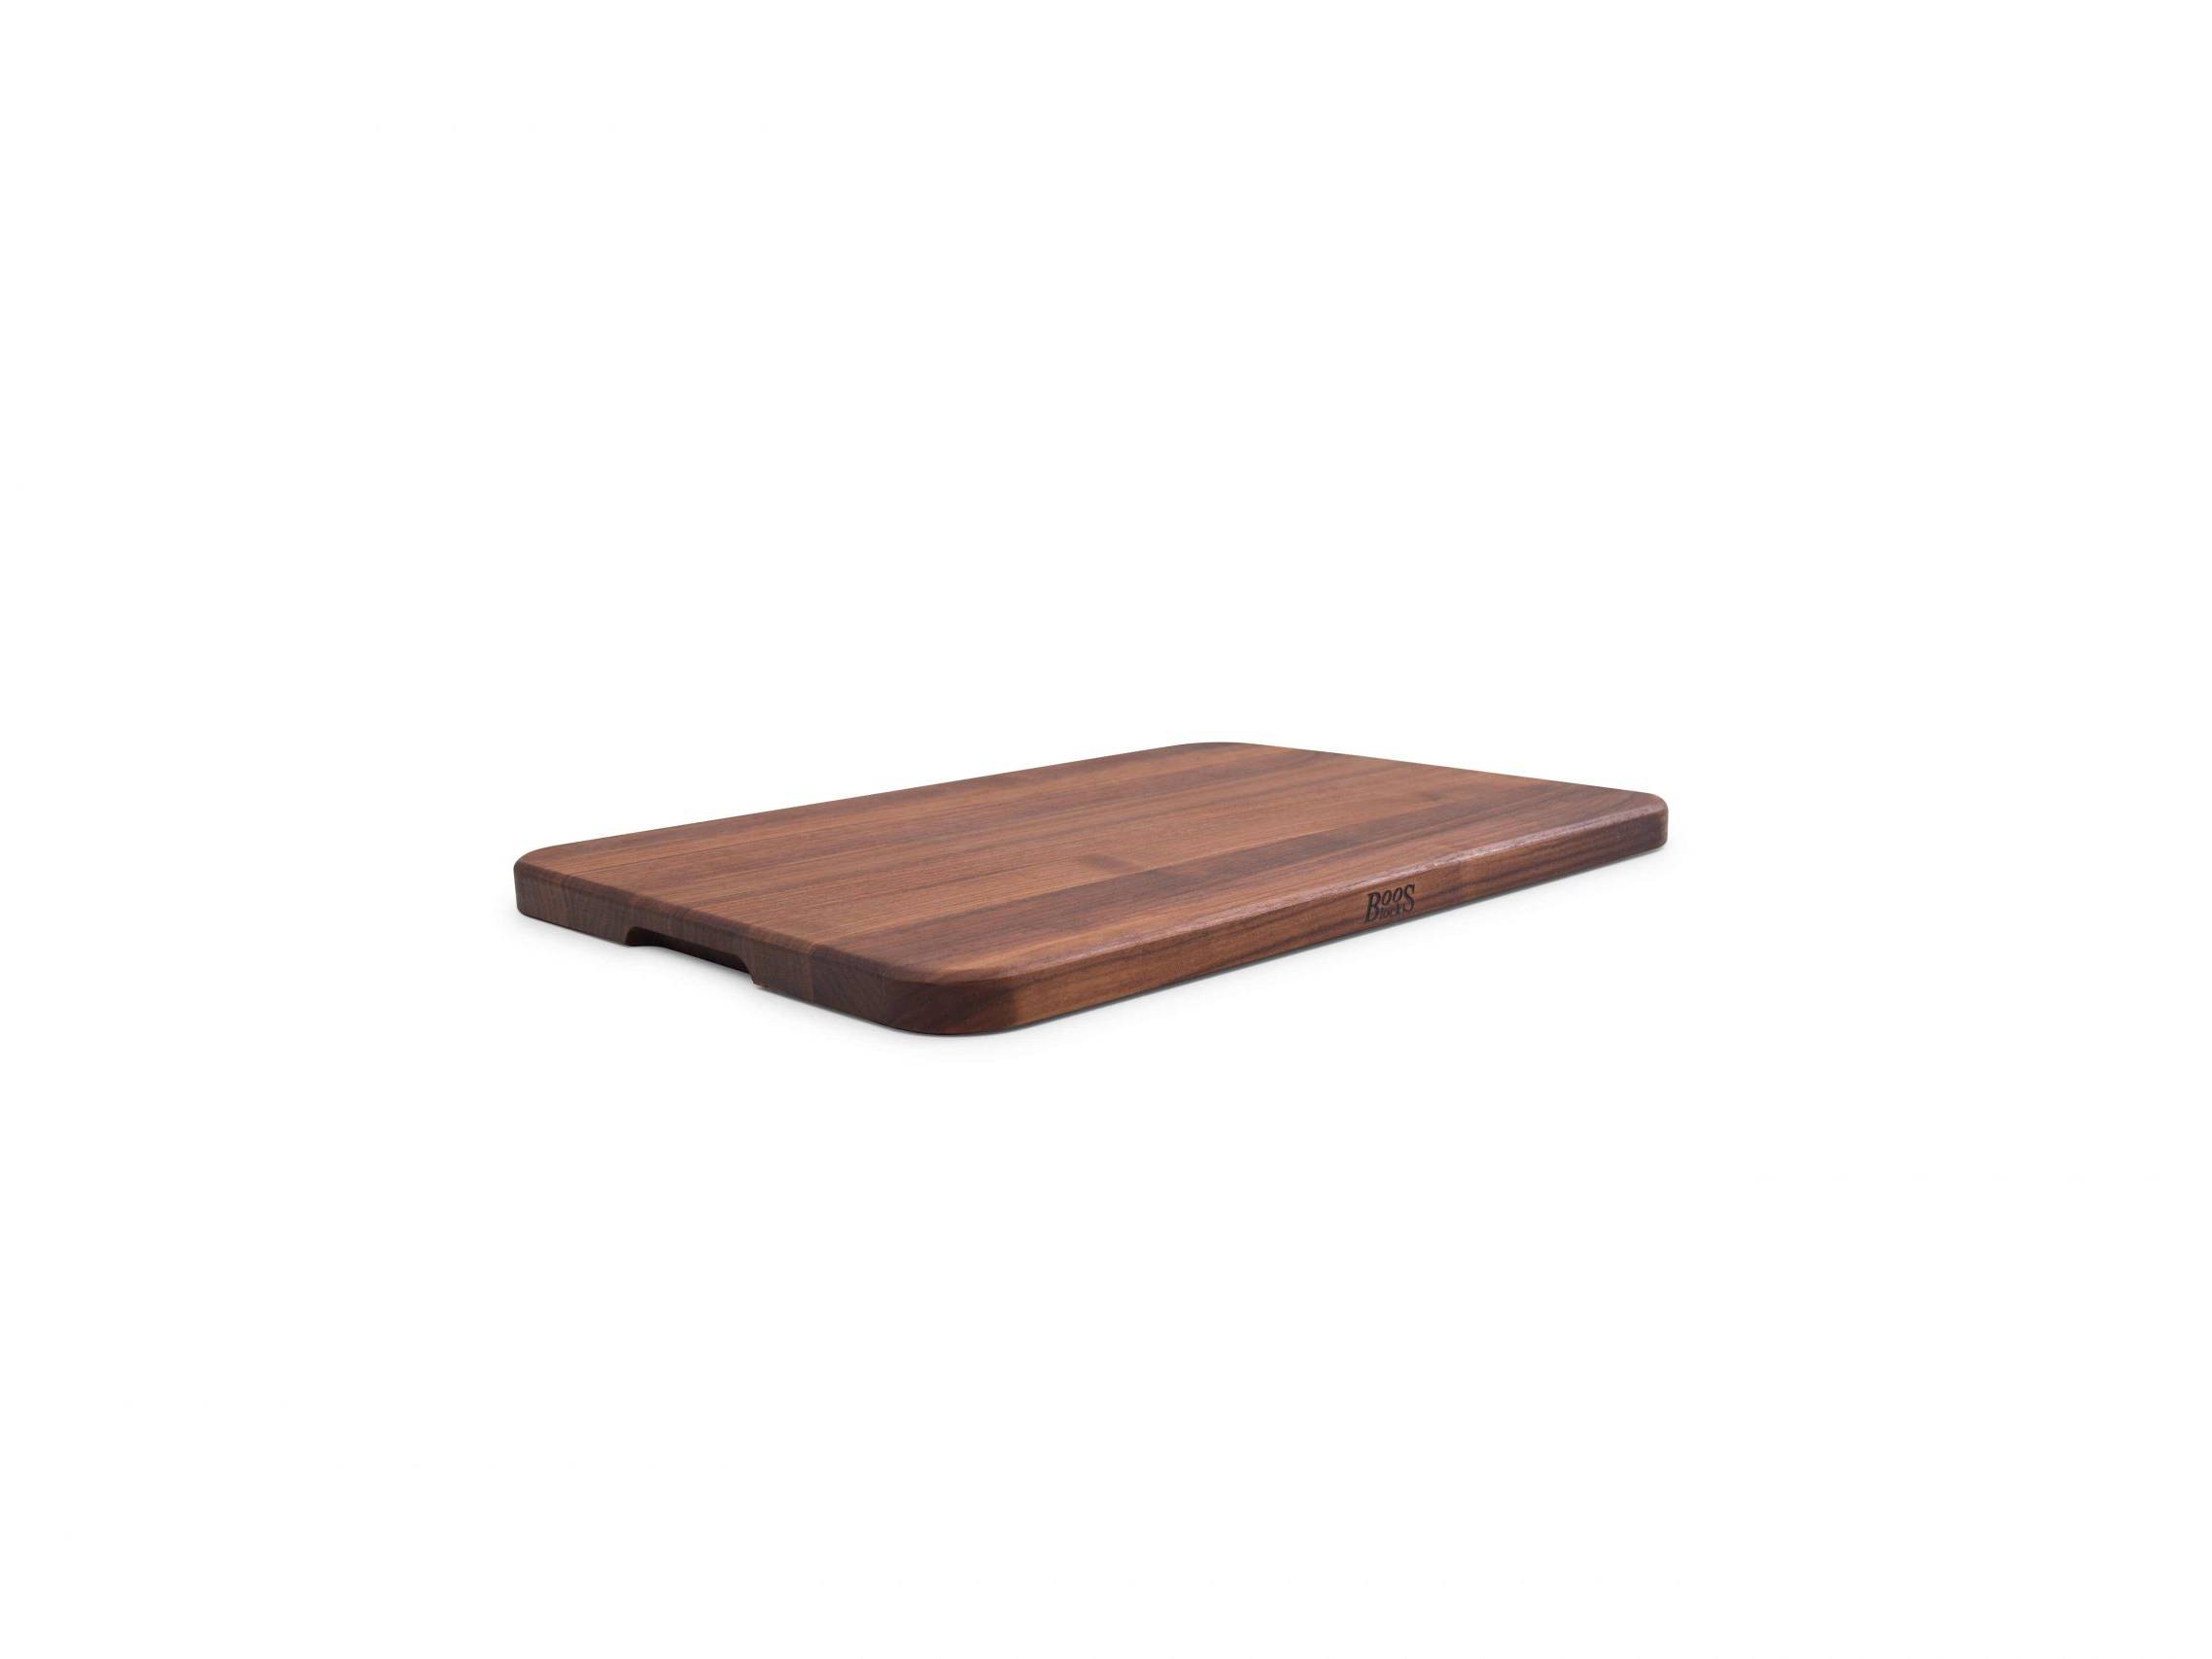 Chop-N-Serve Black Walnut chopping board with recessed grip; can be used on both sides 5